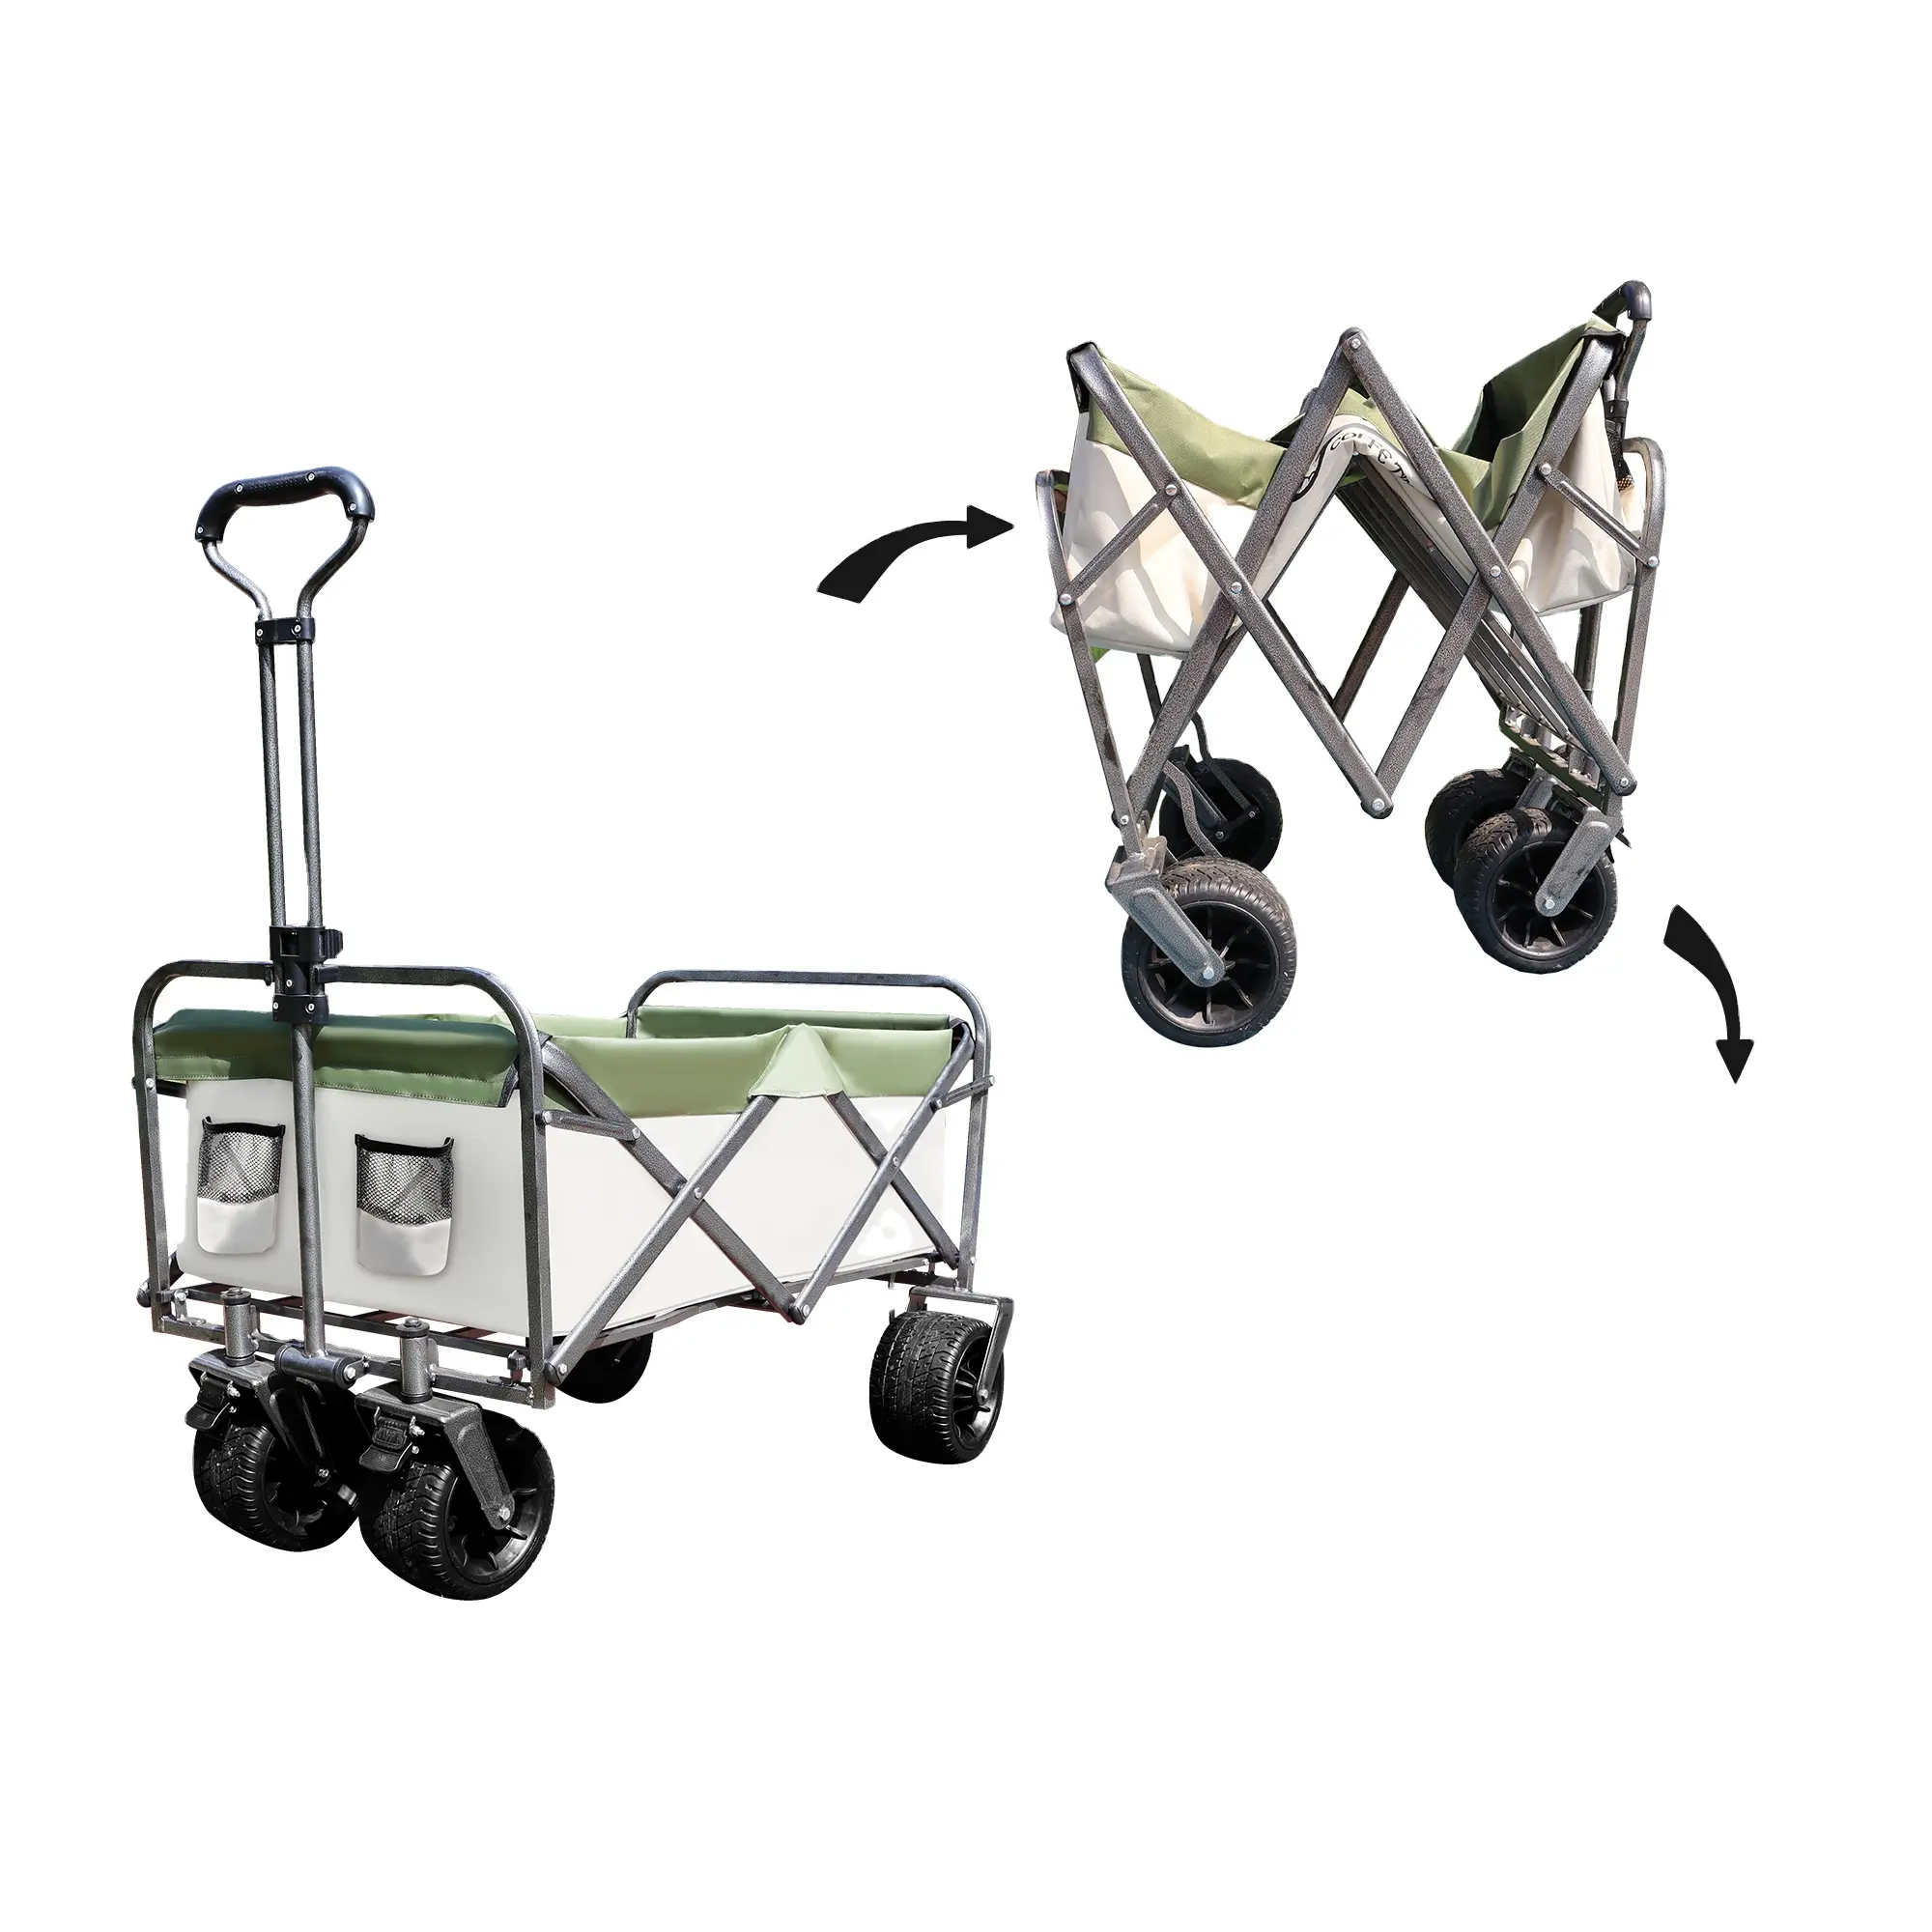 Outdoor Camping and mountaineering equipment folding wagon folding trolley Utility Wagon With Big Wheels Adjustable Portable